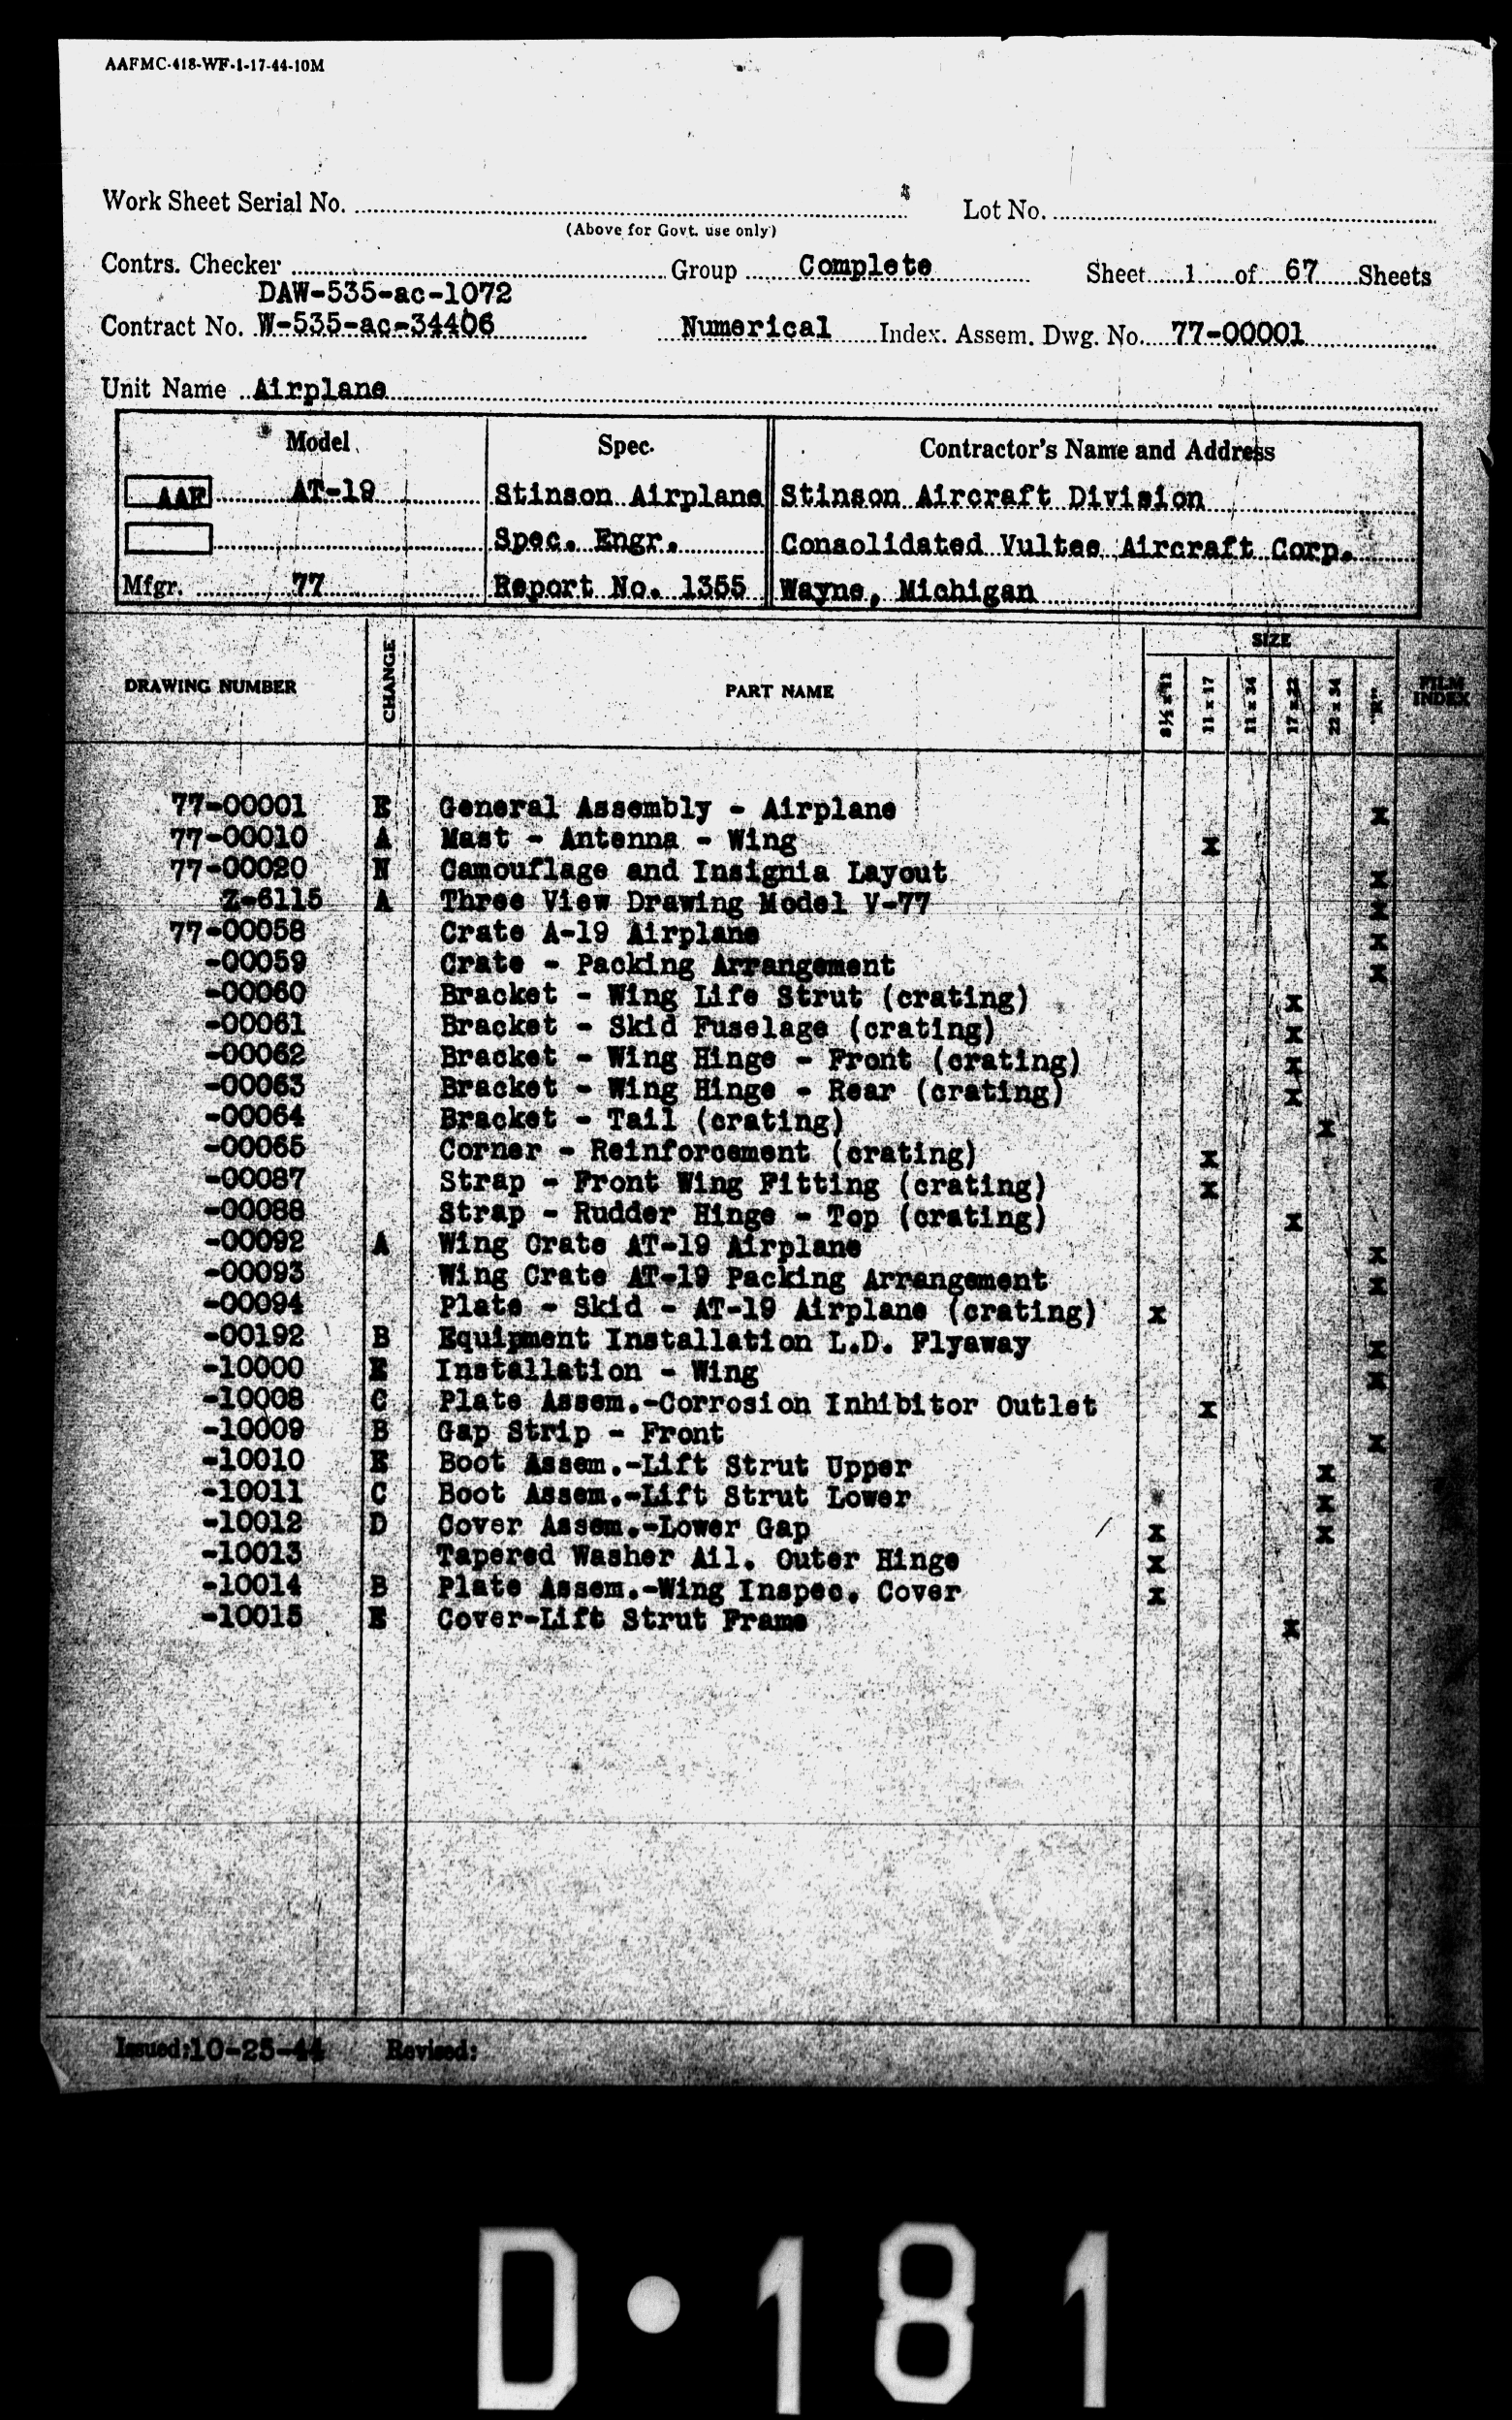 Sample page 1 from AirCorps Library document: Numerical Drawing Index for AT-19